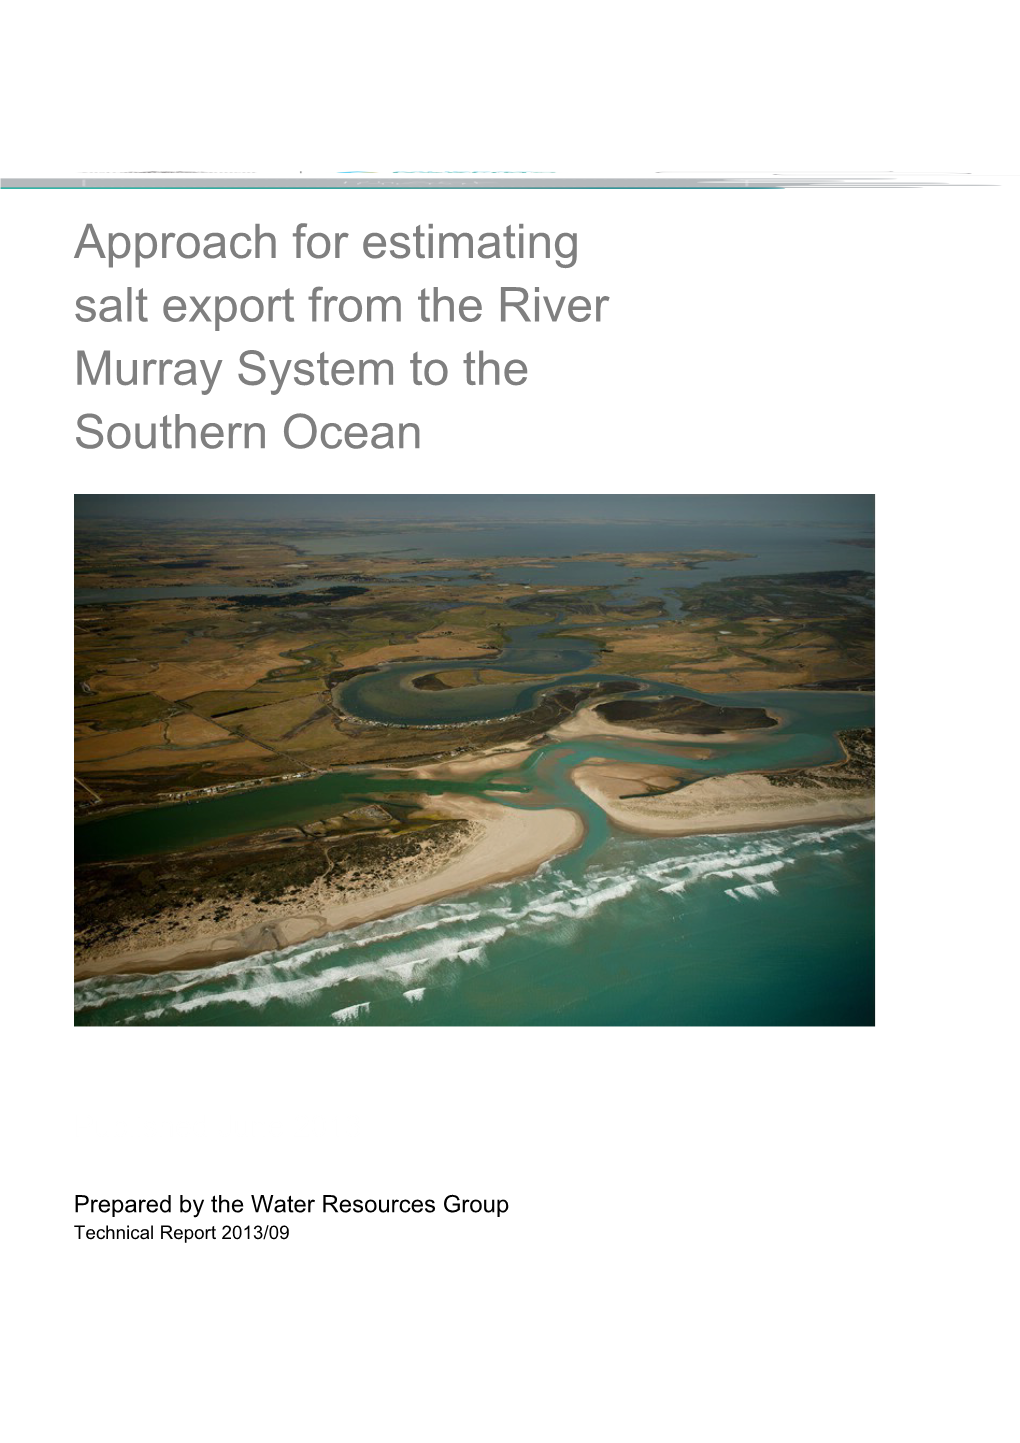 Approach for Estimating Salt Export from the River Murray System to the Southern Ocean